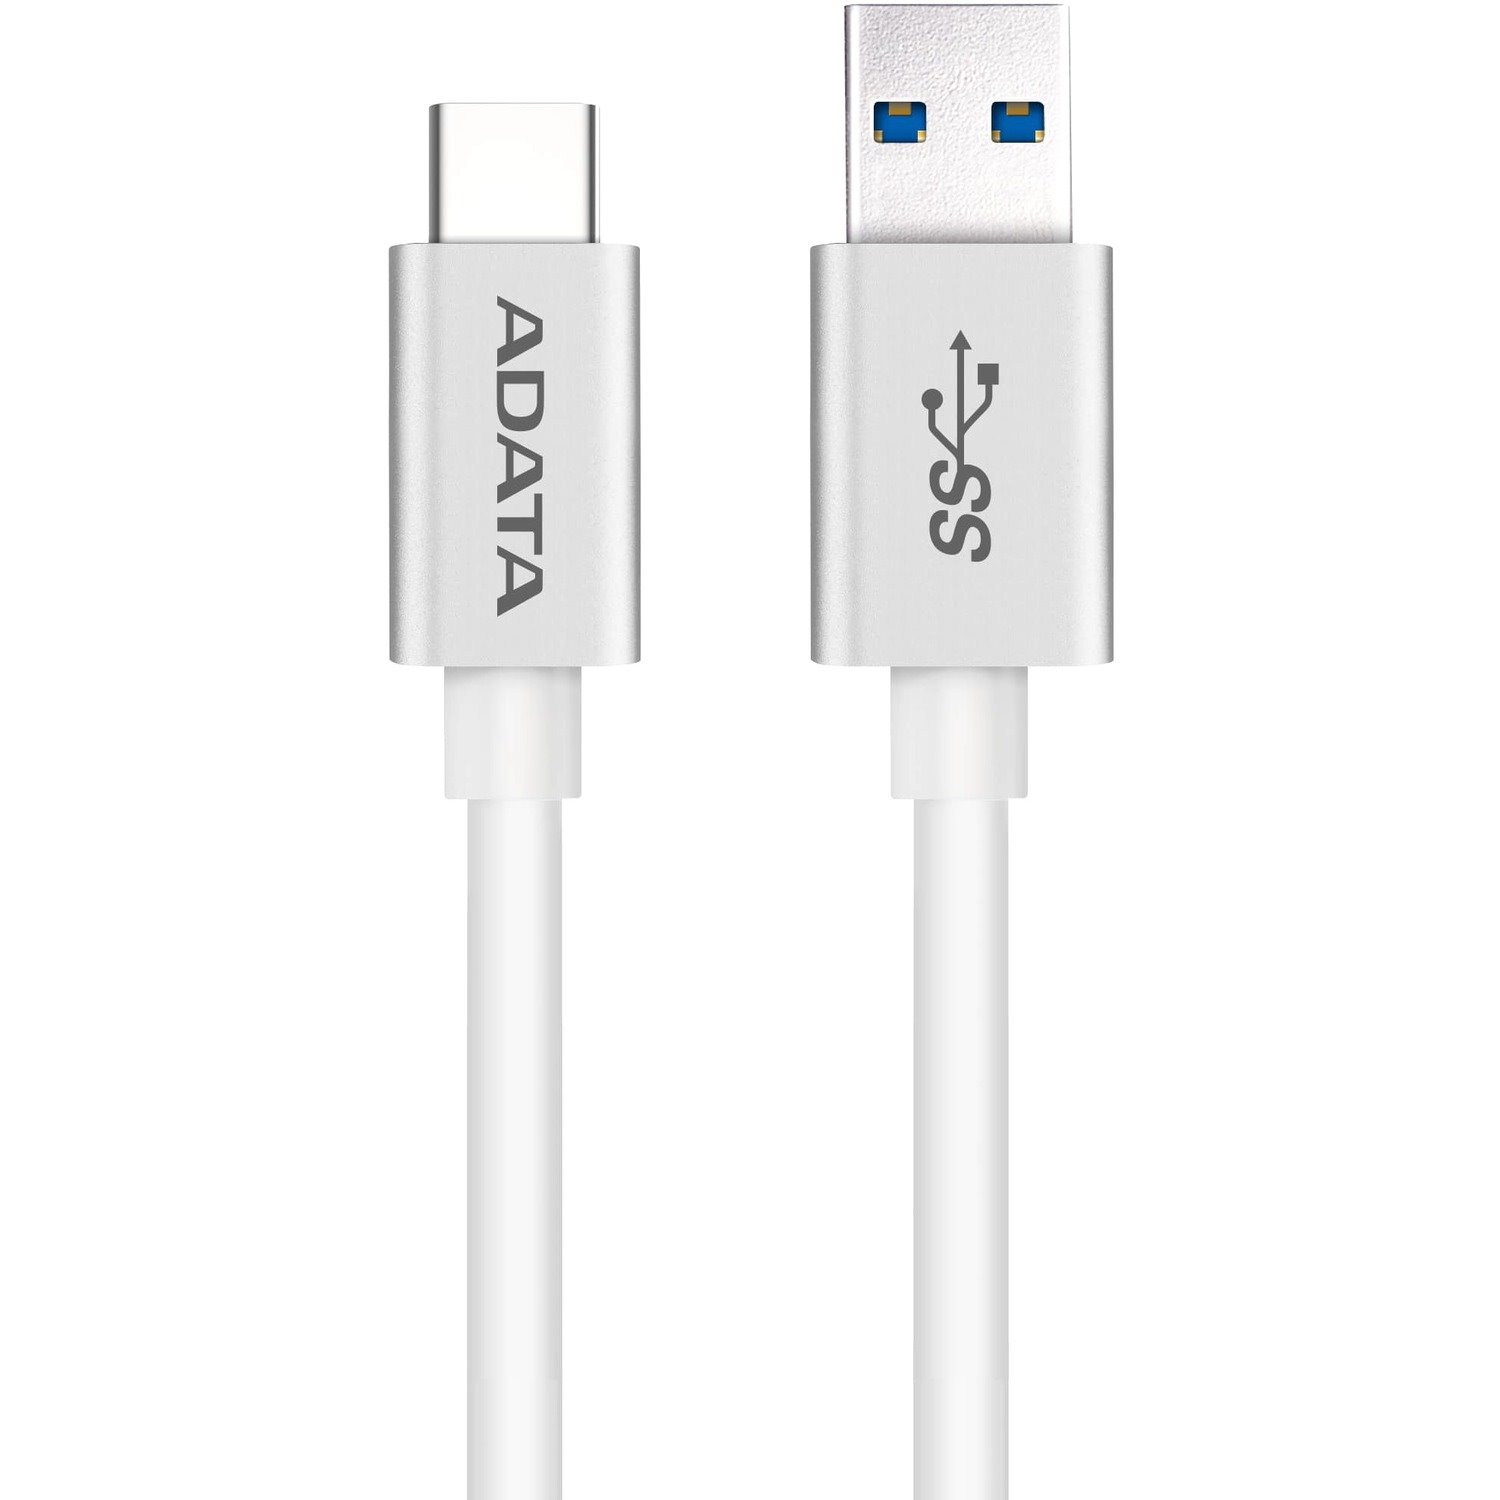 Adata USB-C to USB-A 3.1 Cable